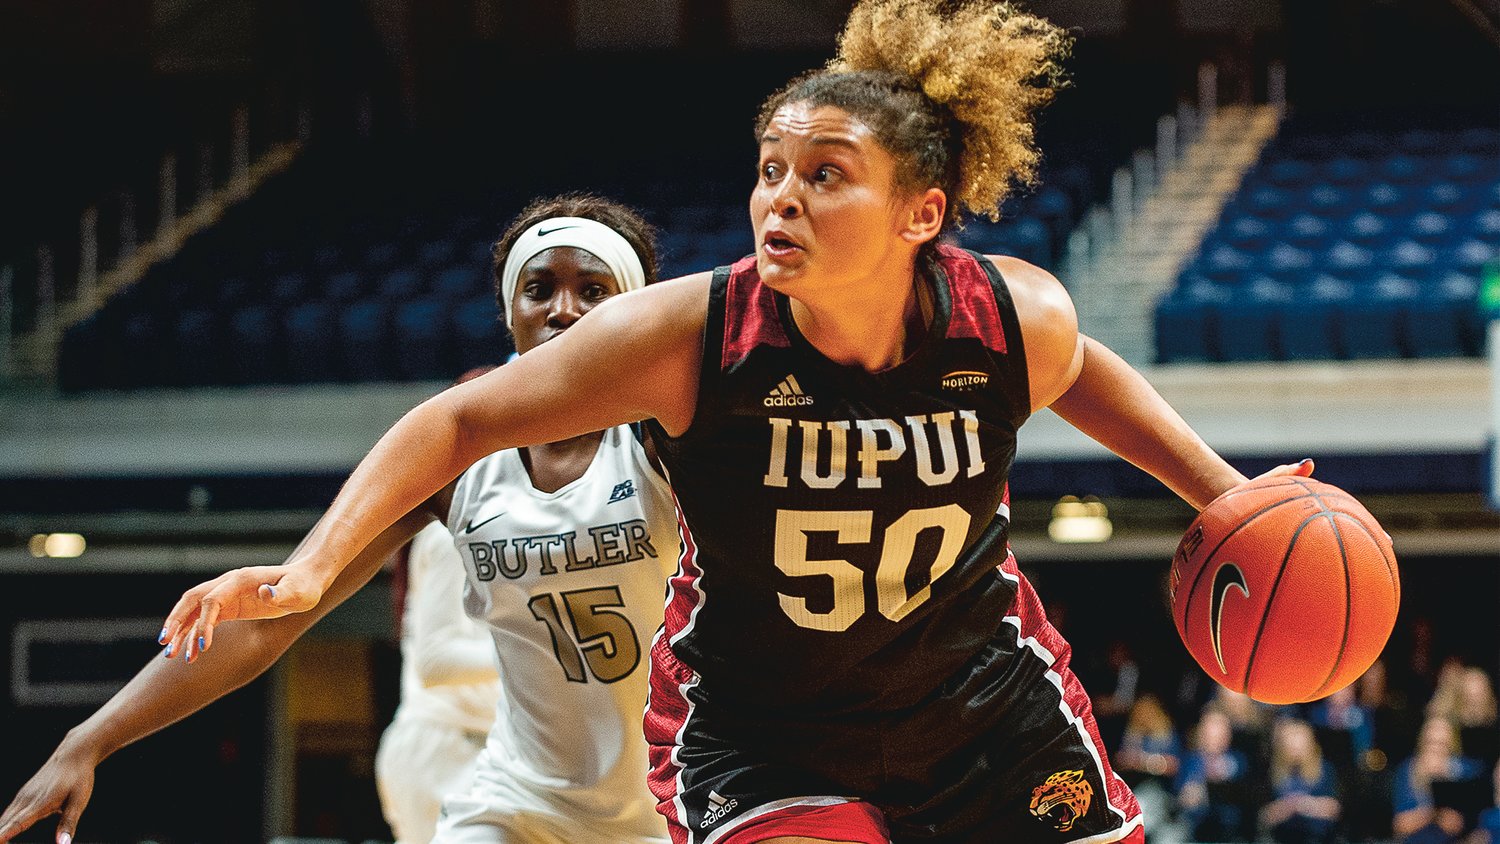 Macee Williams continues to lead IUPUI Women's basketball in scoring during her junior season with 13.8 points per game.